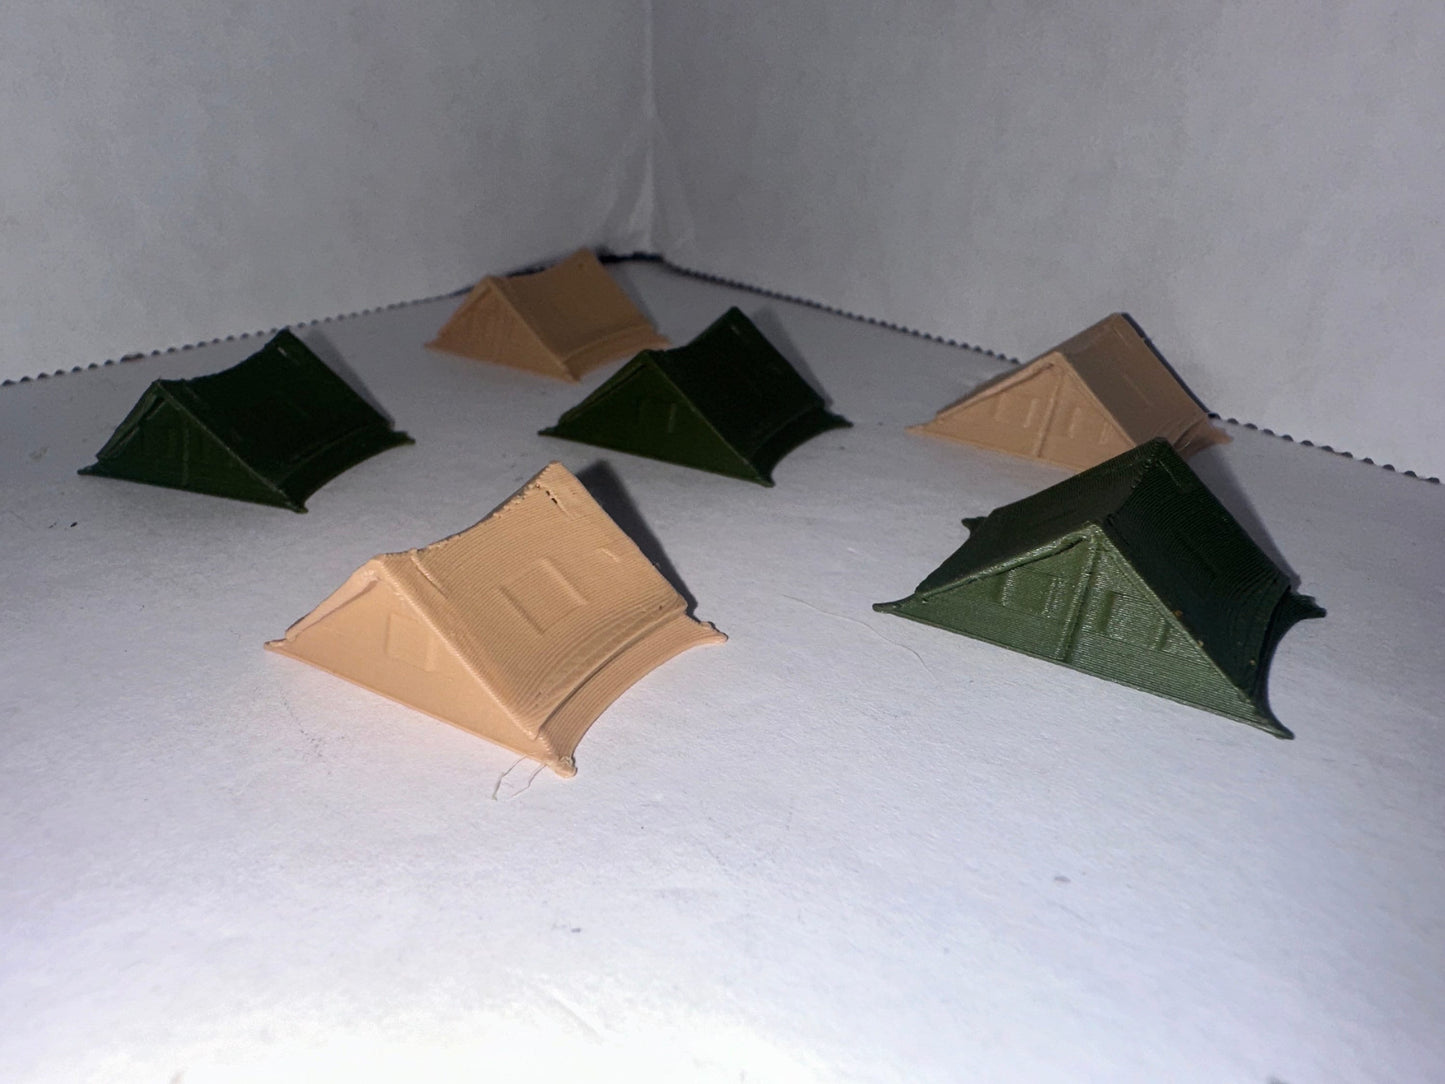 N - Scale Camping Tents 6-Pack Army / Military Colors 1:160 Camp Scenery Diorama